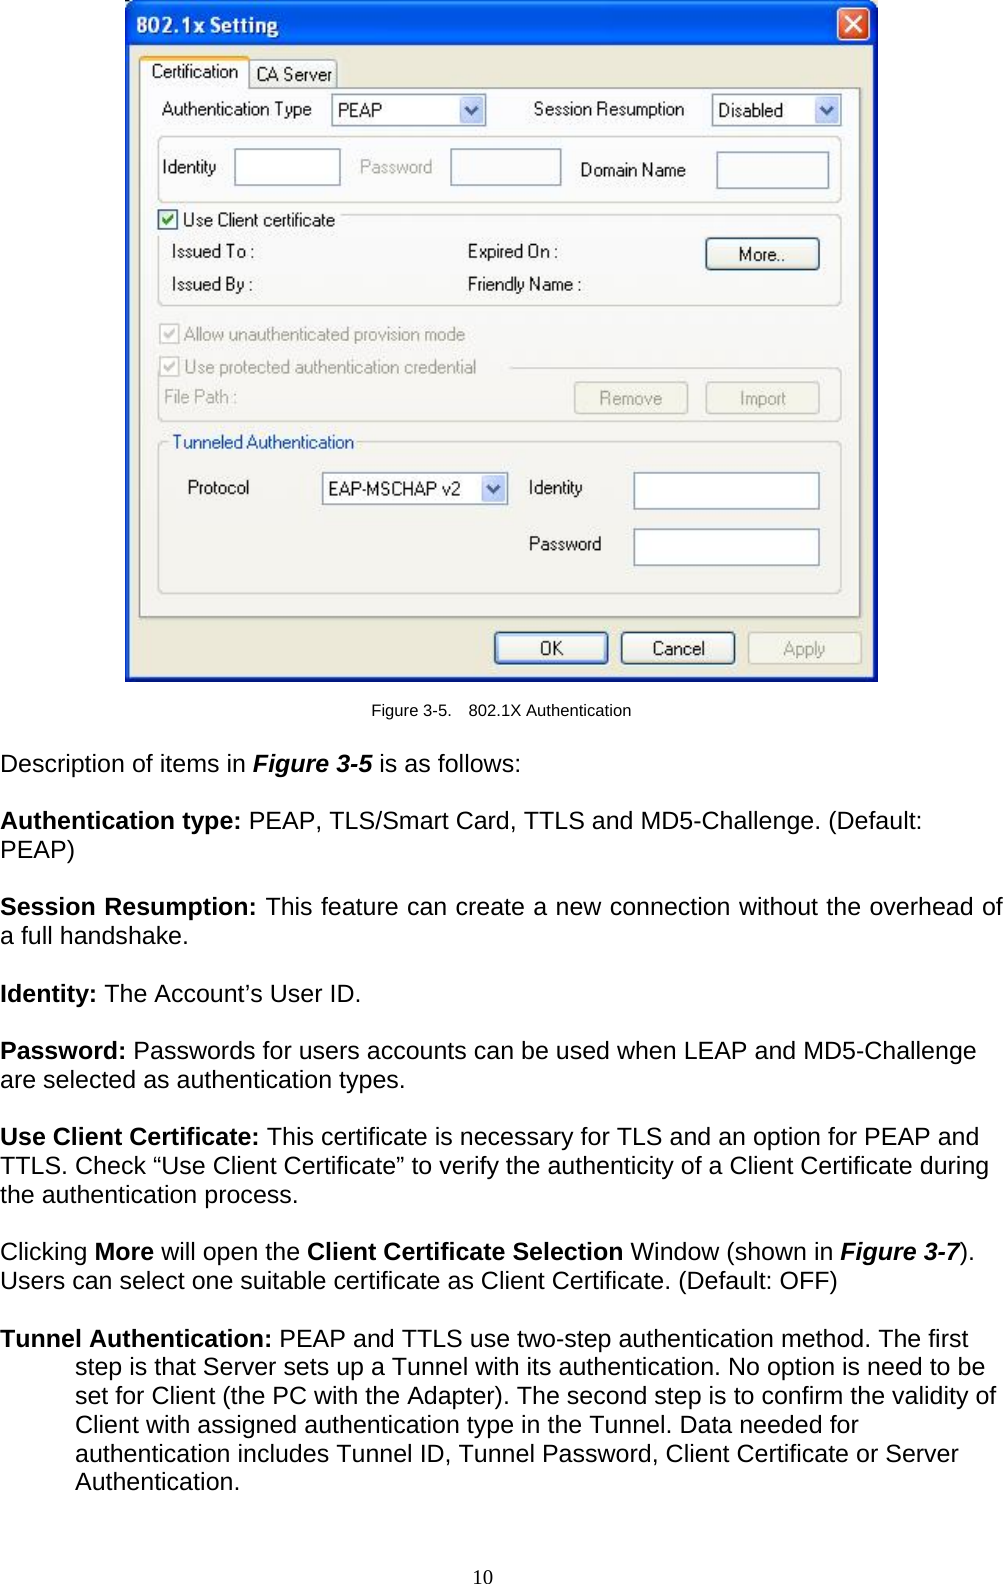   Figure 3-5.  802.1X Authentication  Description of items in Figure 3-5 is as follows:  Authentication type: PEAP, TLS/Smart Card, TTLS and MD5-Challenge. (Default: PEAP)  Session Resumption: This feature can create a new connection without the overhead of a full handshake.  Identity: The Account’s User ID.  Password: Passwords for users accounts can be used when LEAP and MD5-Challenge are selected as authentication types.  Use Client Certificate: This certificate is necessary for TLS and an option for PEAP and TTLS. Check “Use Client Certificate” to verify the authenticity of a Client Certificate during the authentication process.    Clicking More will open the Client Certificate Selection Window (shown in Figure 3-7). Users can select one suitable certificate as Client Certificate. (Default: OFF)  Tunnel Authentication: PEAP and TTLS use two-step authentication method. The first step is that Server sets up a Tunnel with its authentication. No option is need to be set for Client (the PC with the Adapter). The second step is to confirm the validity of Client with assigned authentication type in the Tunnel. Data needed for authentication includes Tunnel ID, Tunnel Password, Client Certificate or Server Authentication.  10   